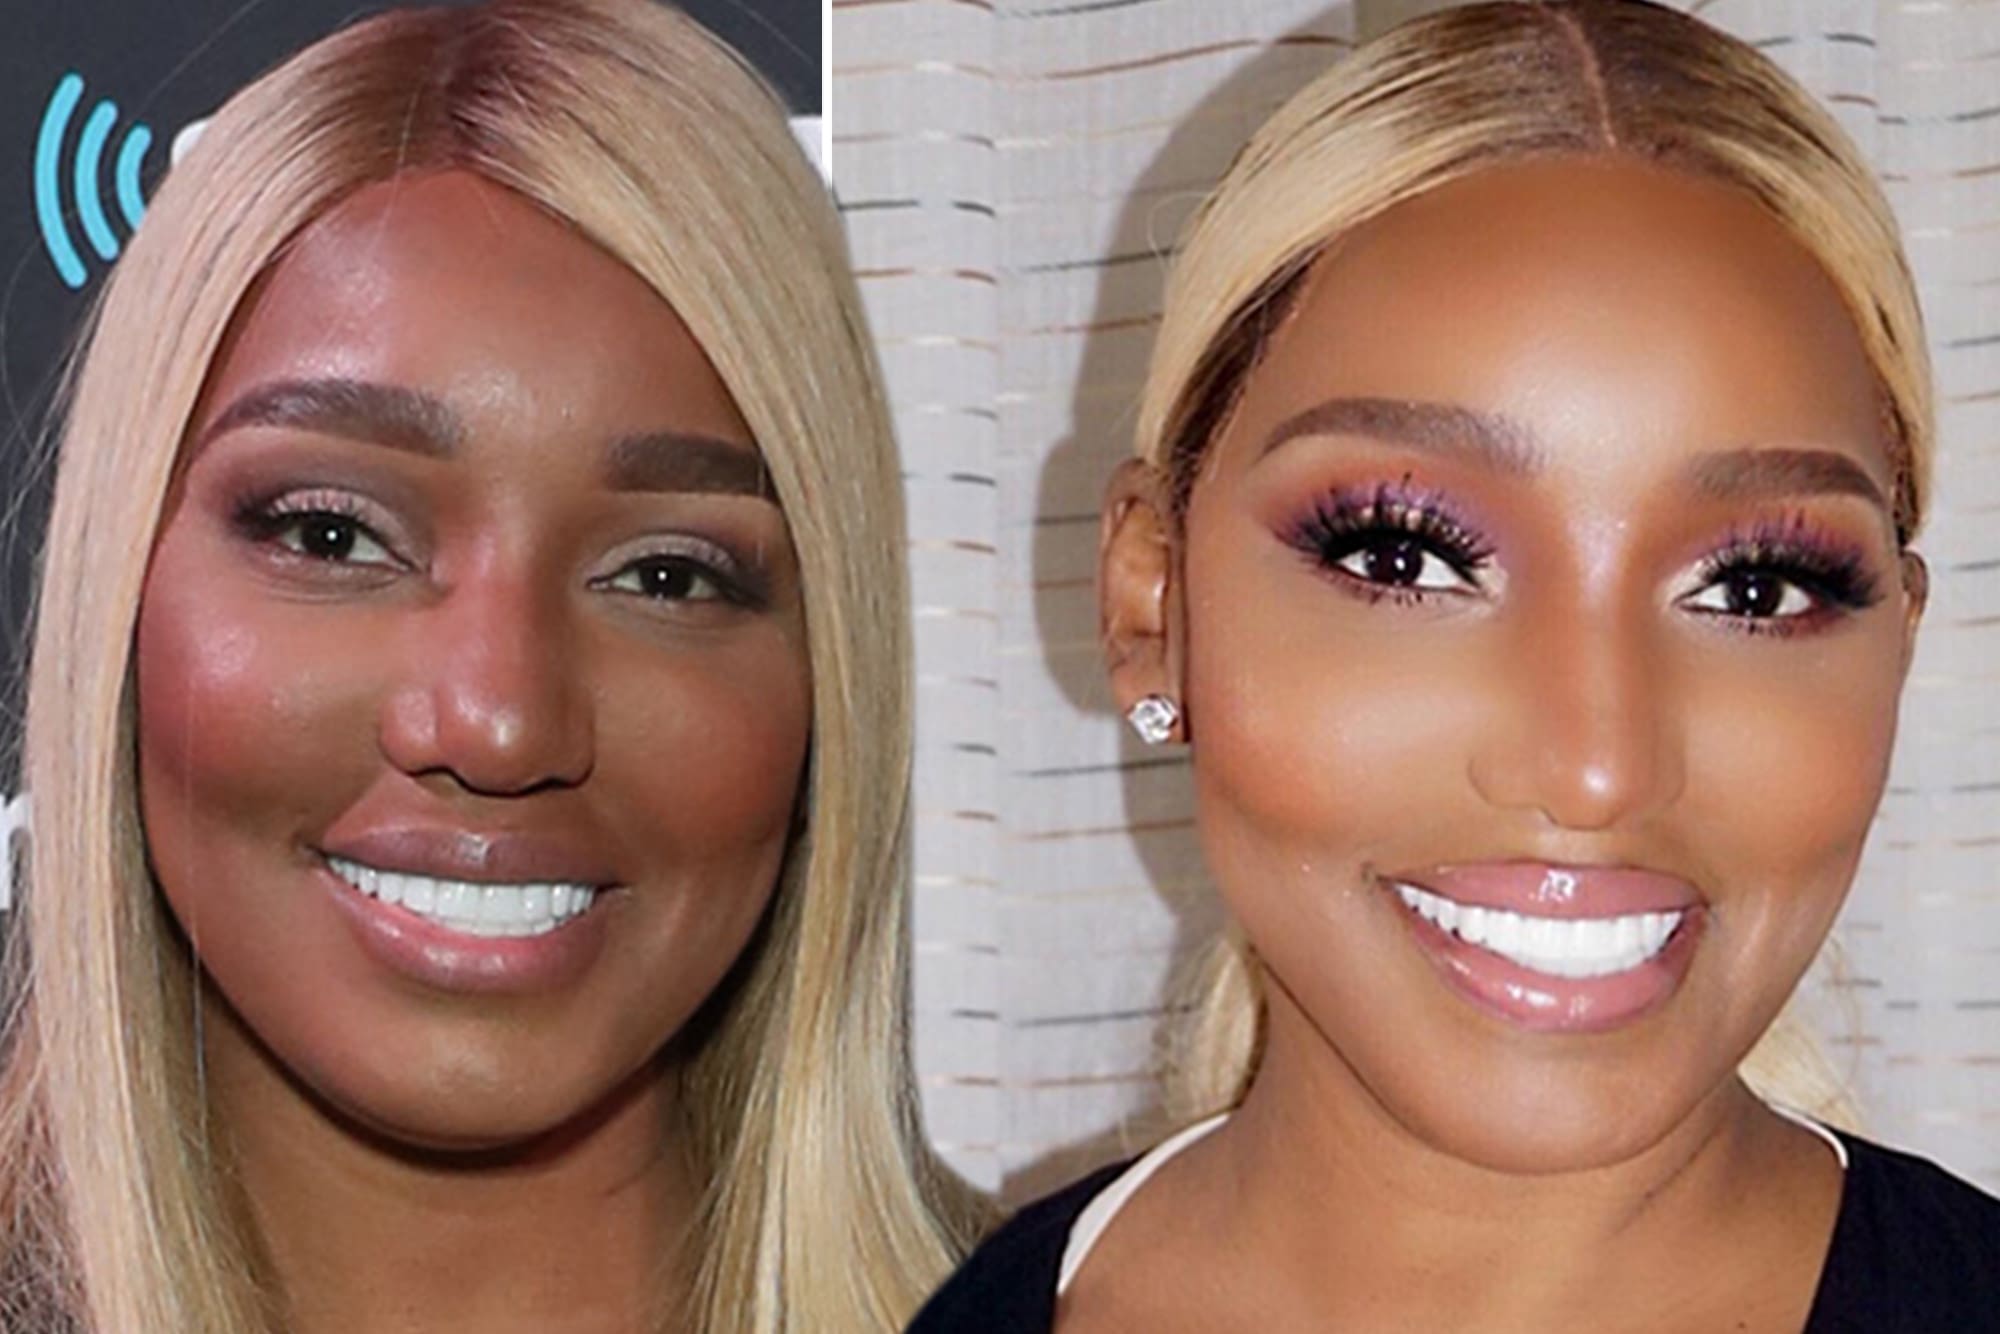 NeNe Leakes Opens Up About What Plastic Surgery She’d